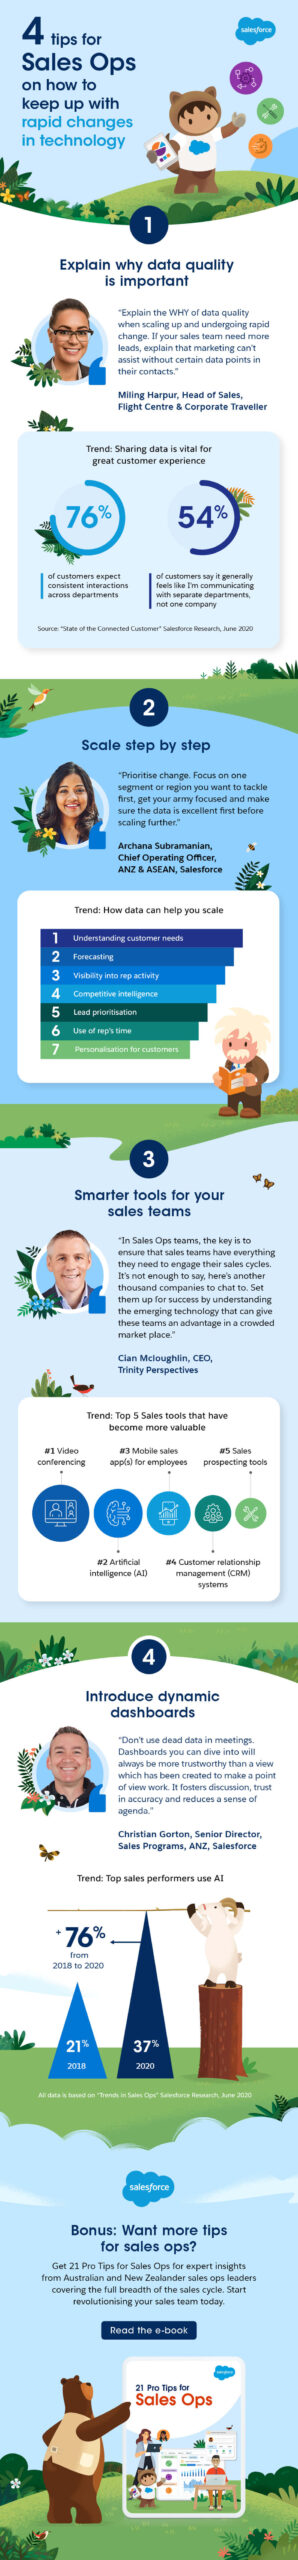 Get more insights from the 21 Pro Tips for Sales Ops e-book.